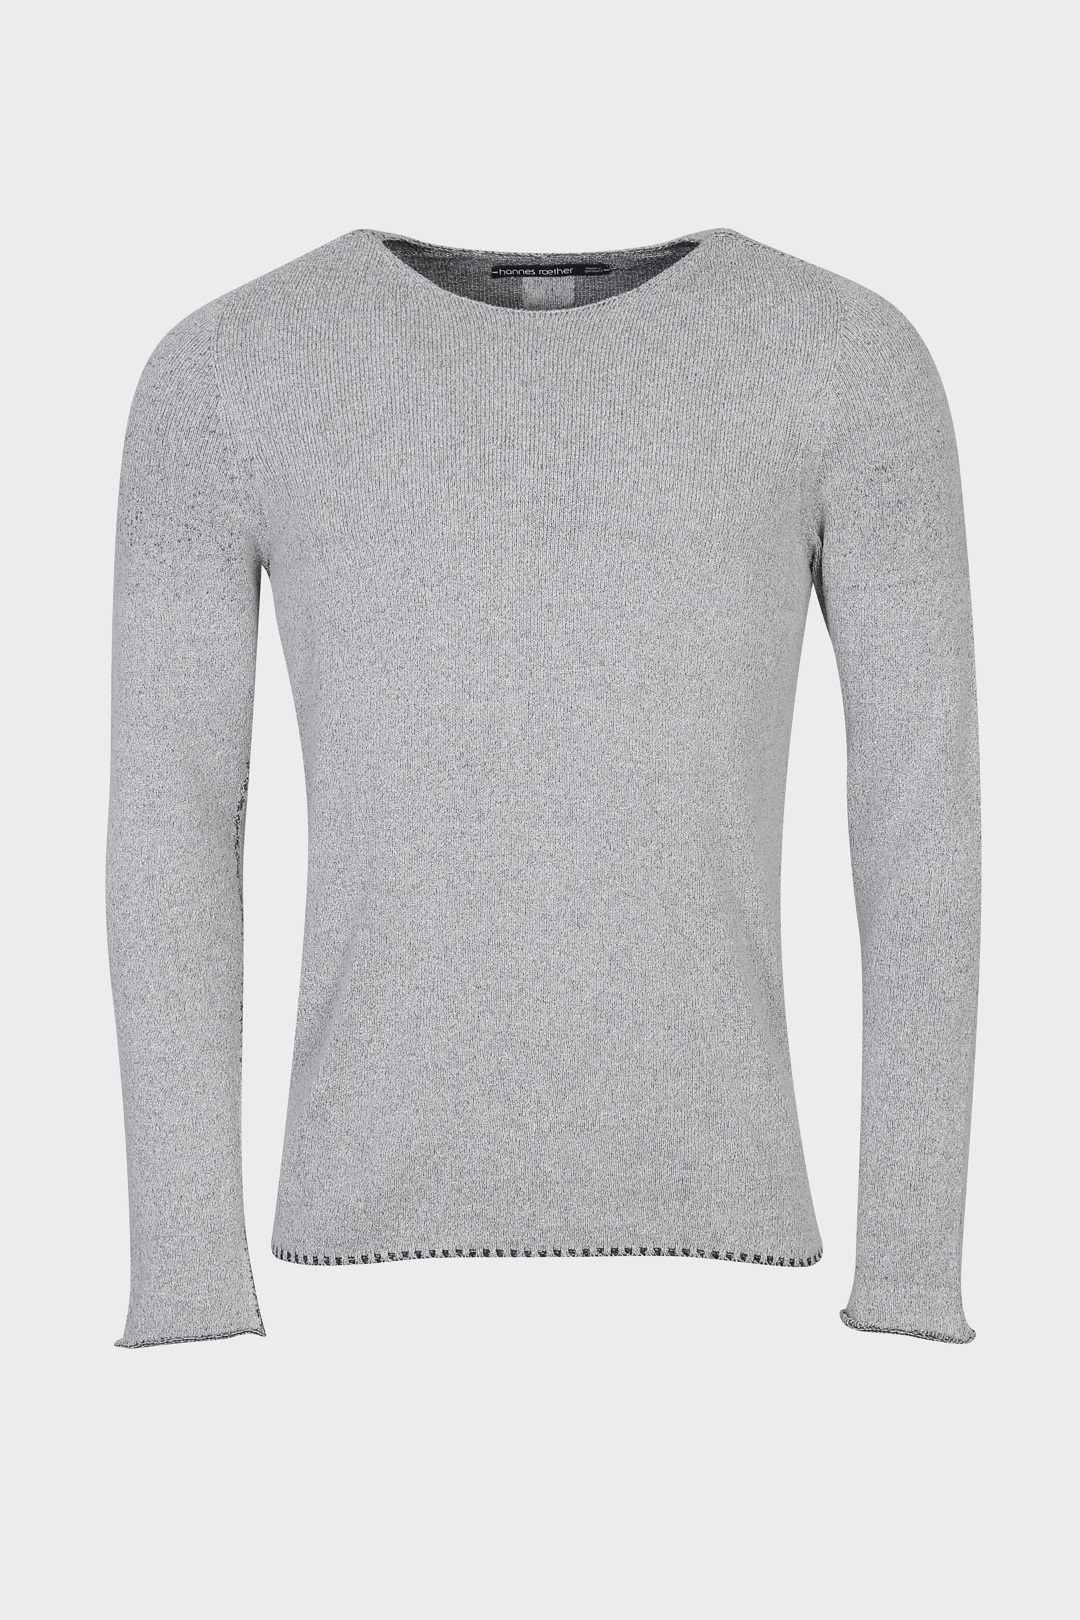 HANNES ROETHER Knit Sweater in Light Grey XL